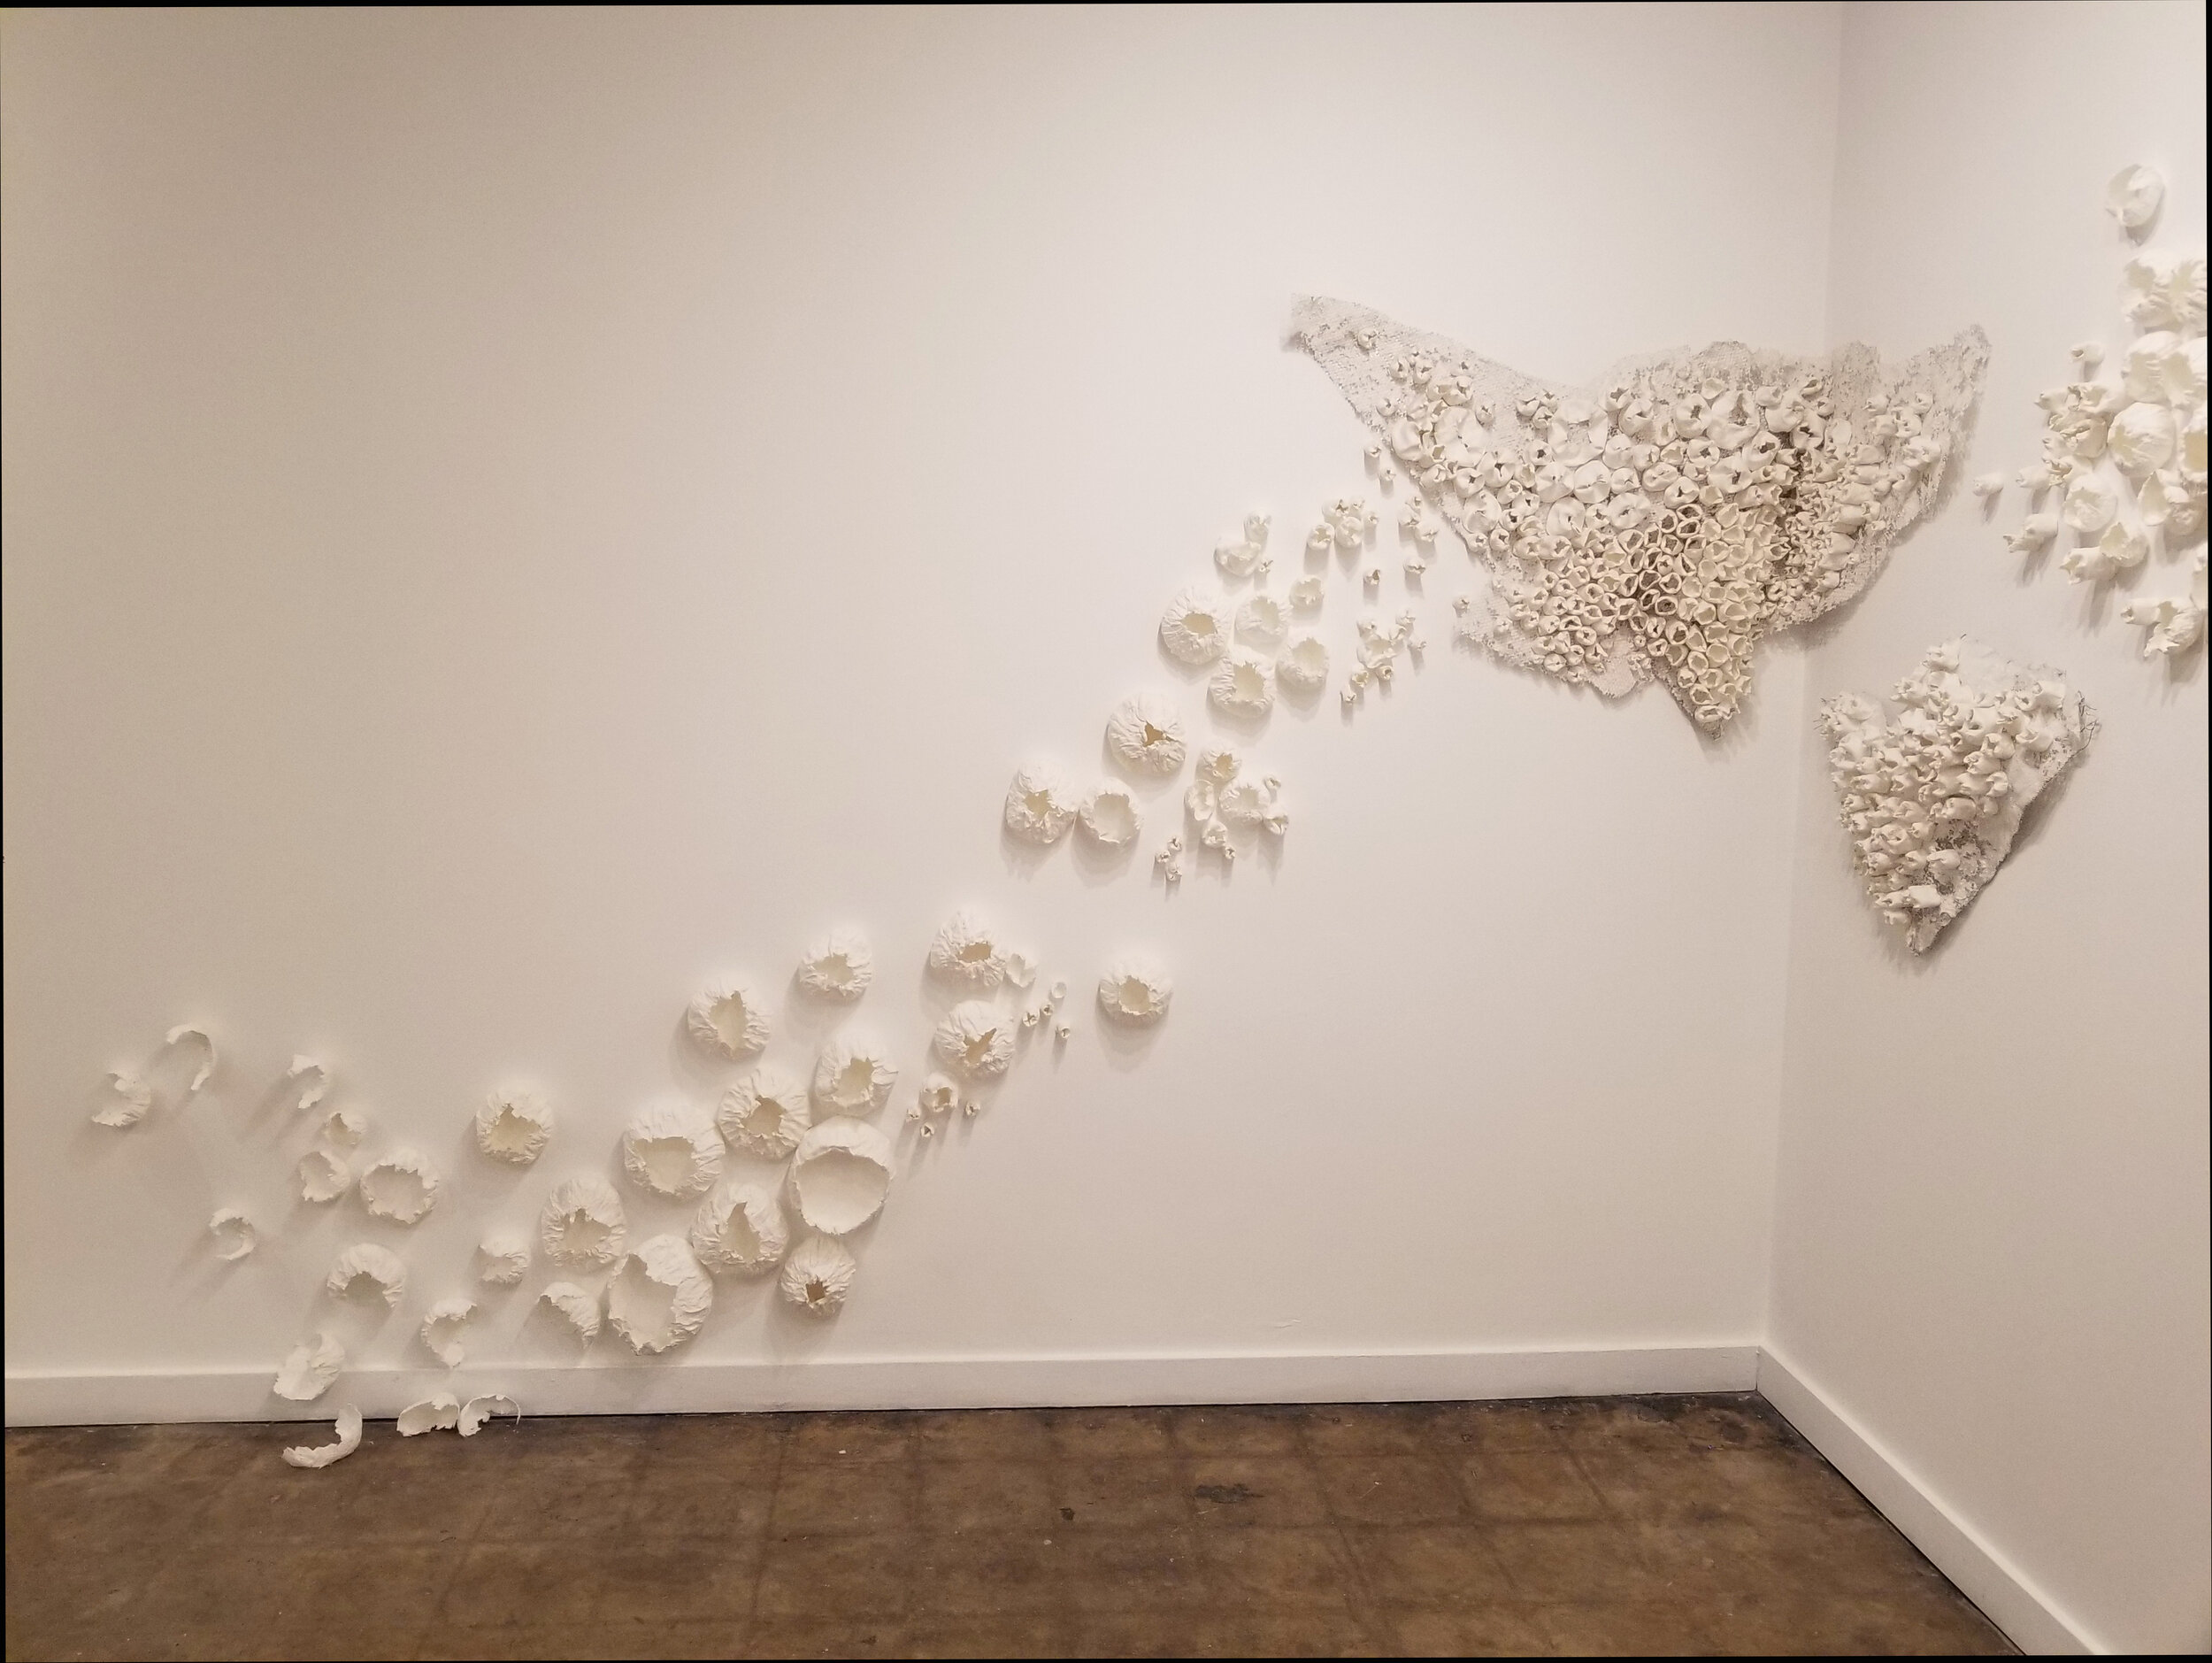  Accumulation, 2019, handmade cotton paper, wire mesh, dimensions variable     